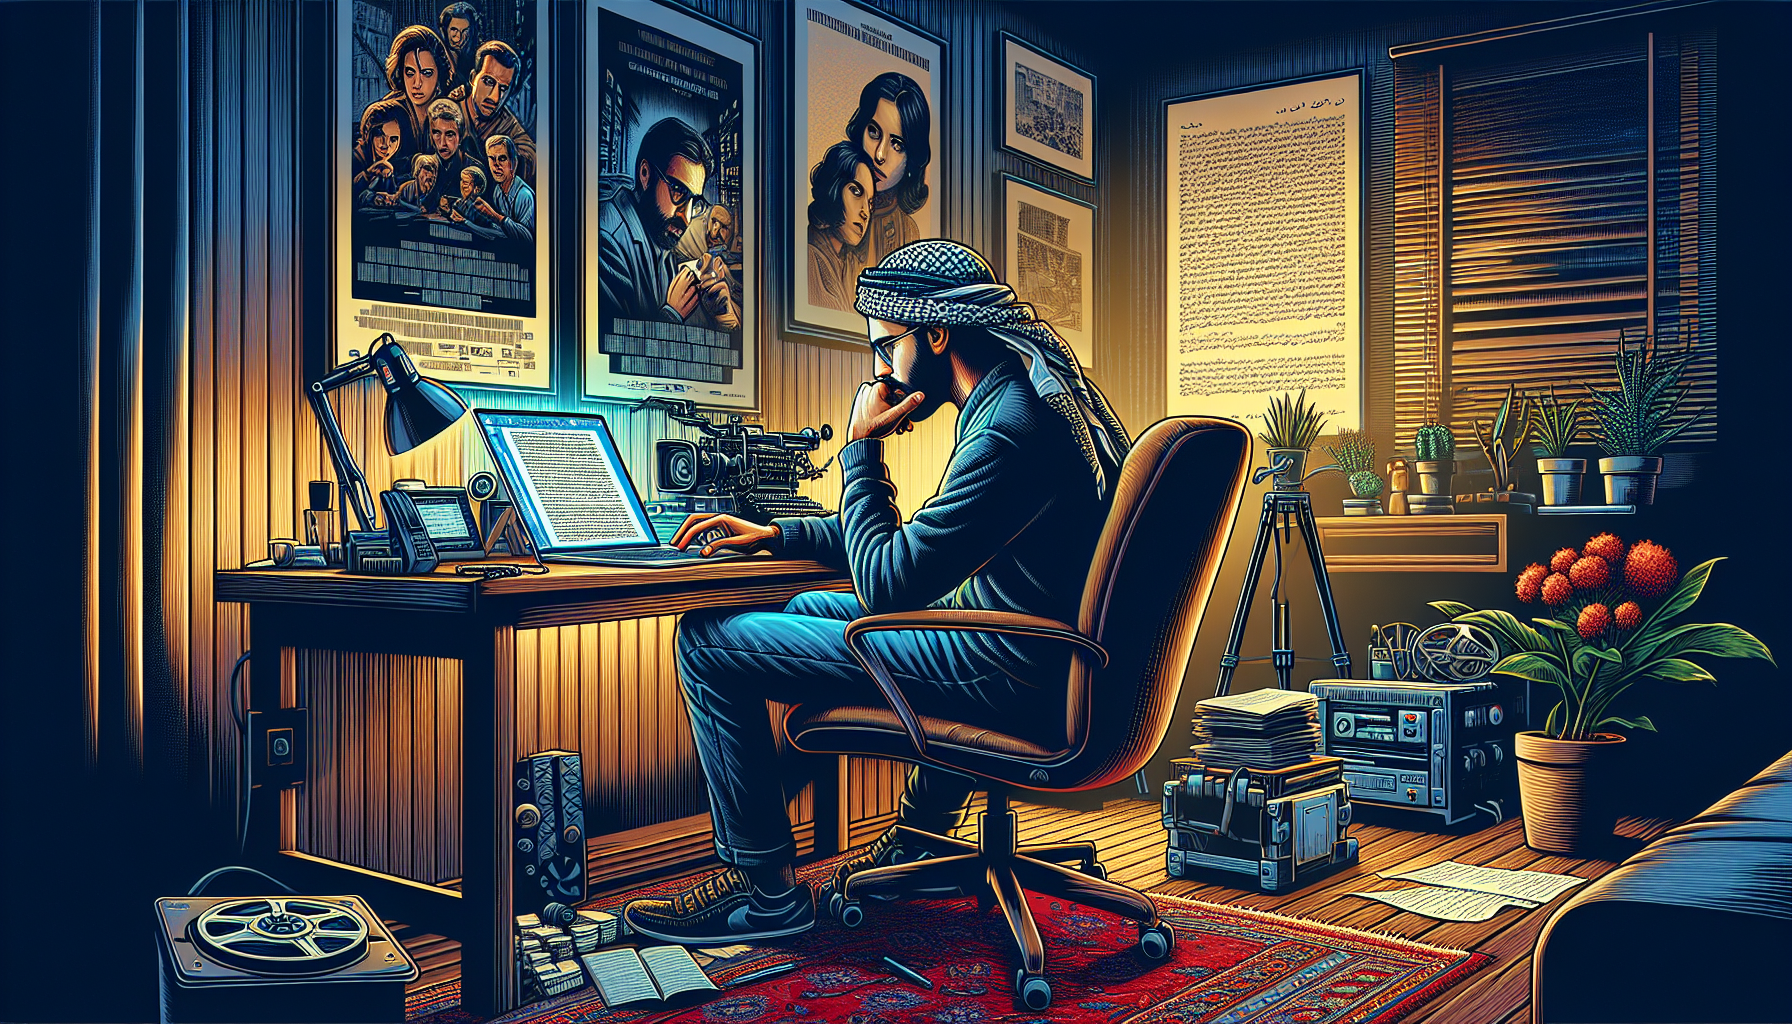 A digital painting of a screenwriter deeply focused on his laptop in a dimly lit, cozy home office, surrounded by movie posters and film equipment, with the Final Draft software open on the screen dis